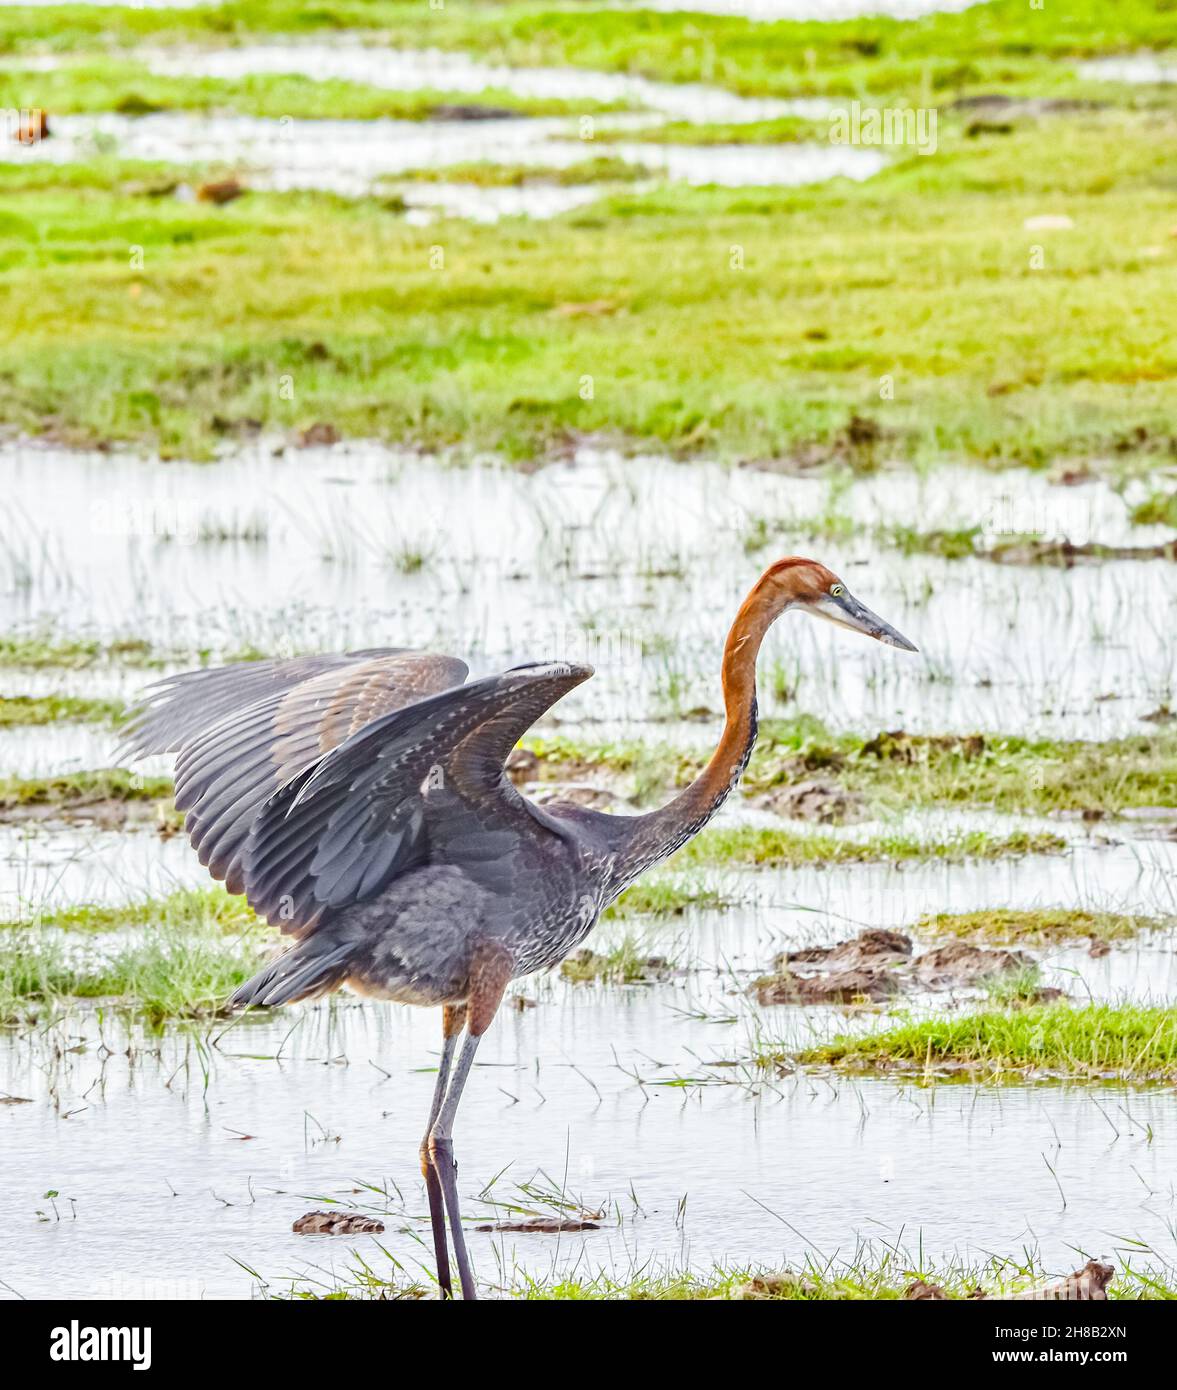 A Goliath herons (Ardea goliath), the world's largest living heron, stretches its wings as it hunts for prey in the wetlands of Amboseli National Park Stock Photo